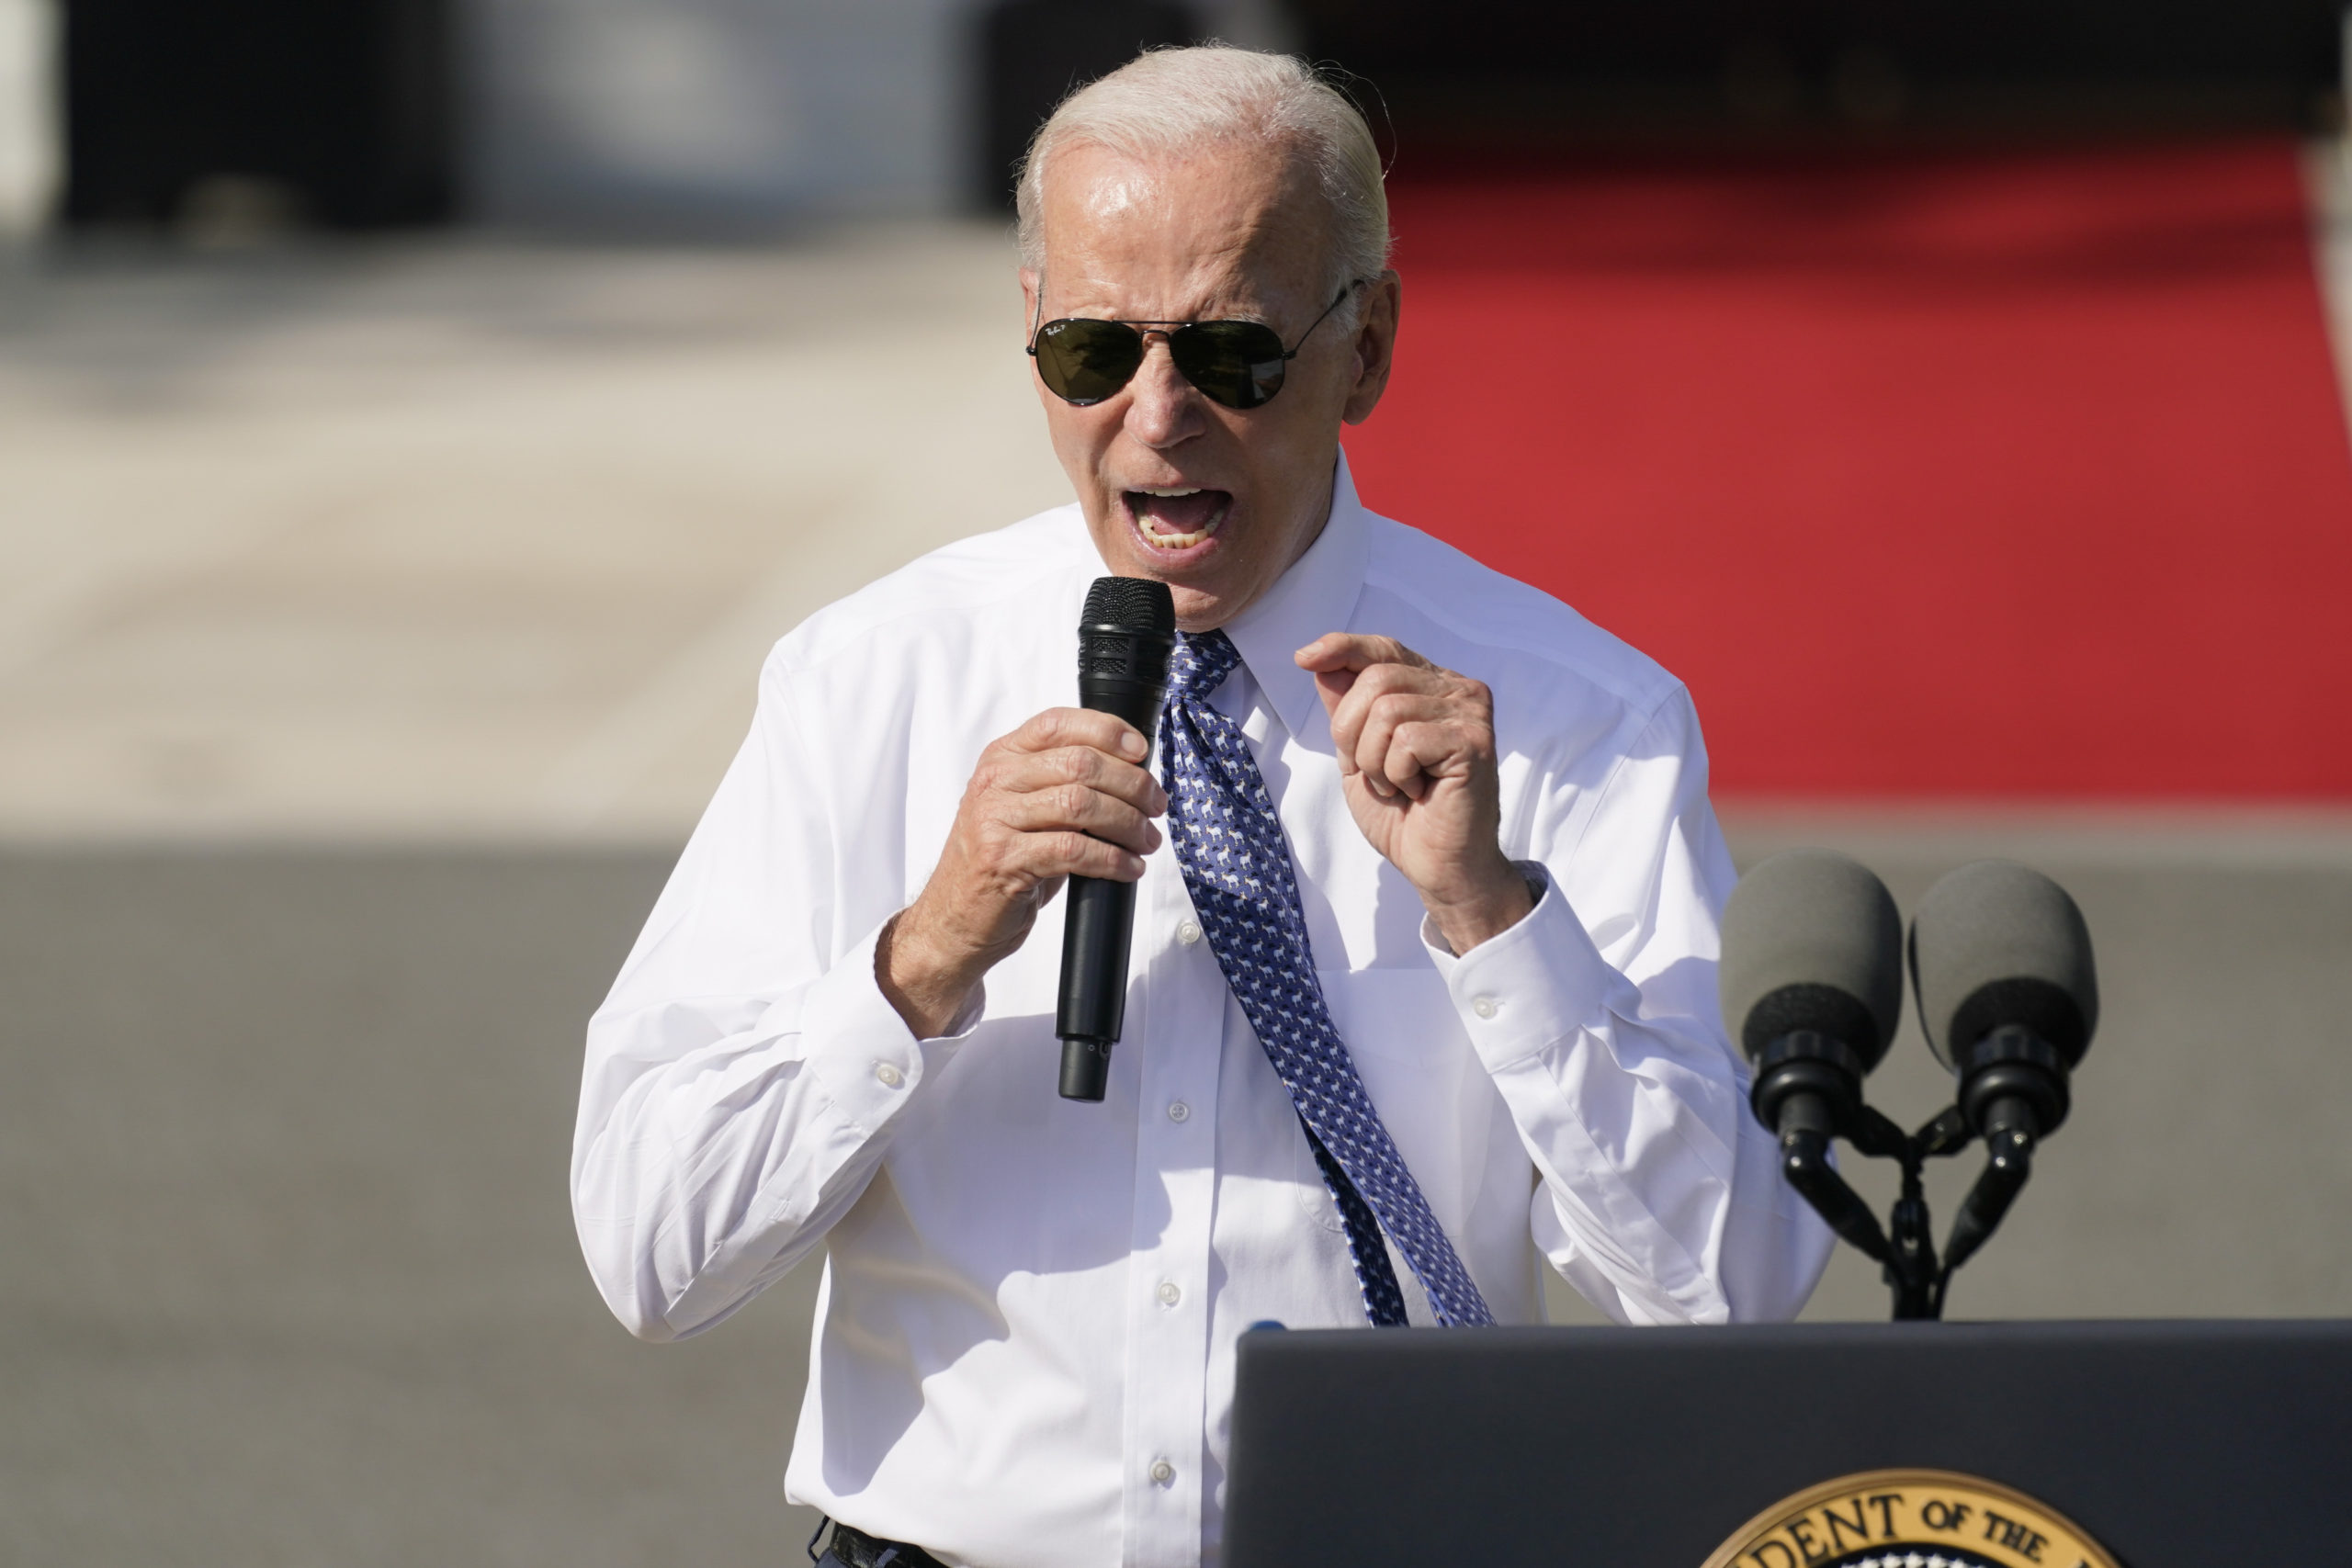 President Joe Biden speaks about the reducing inflation during a ceremony on the South Lawn of the White House in Washington, D.C, on Sept. 13, 2022.